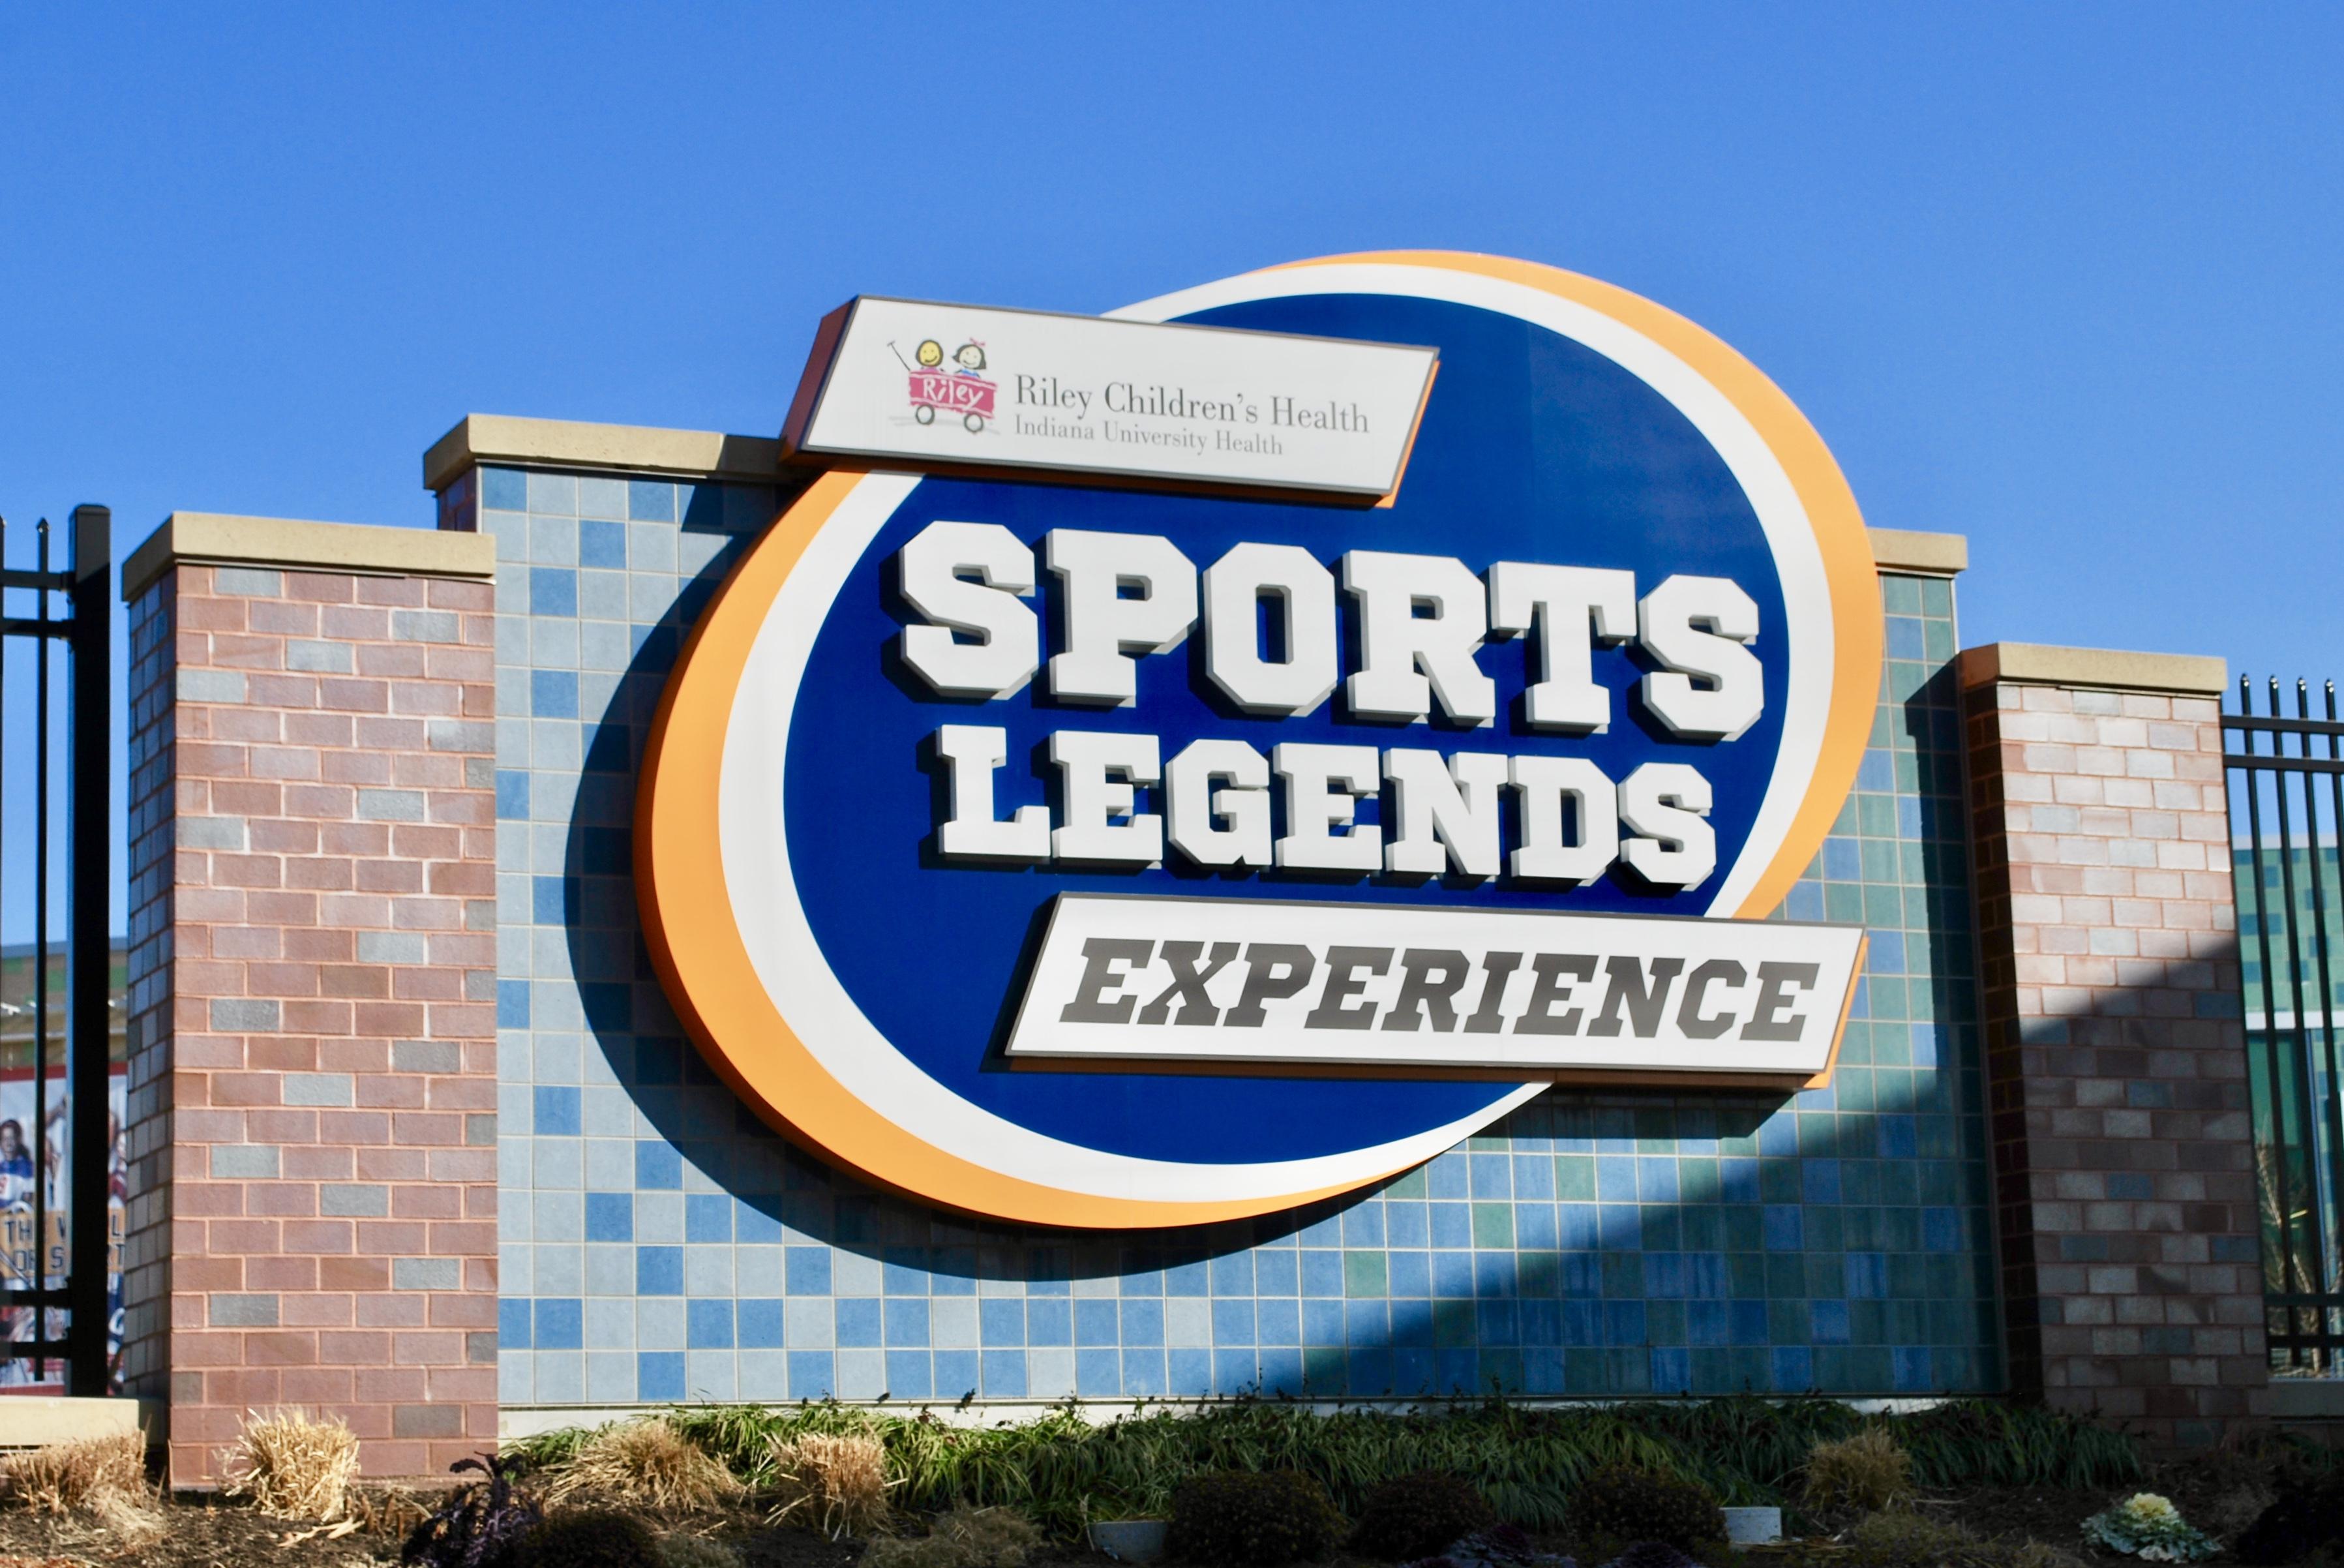 A sign that says "Sports Legends Experience" and a smaller sign attached with the Riley Children logo. 